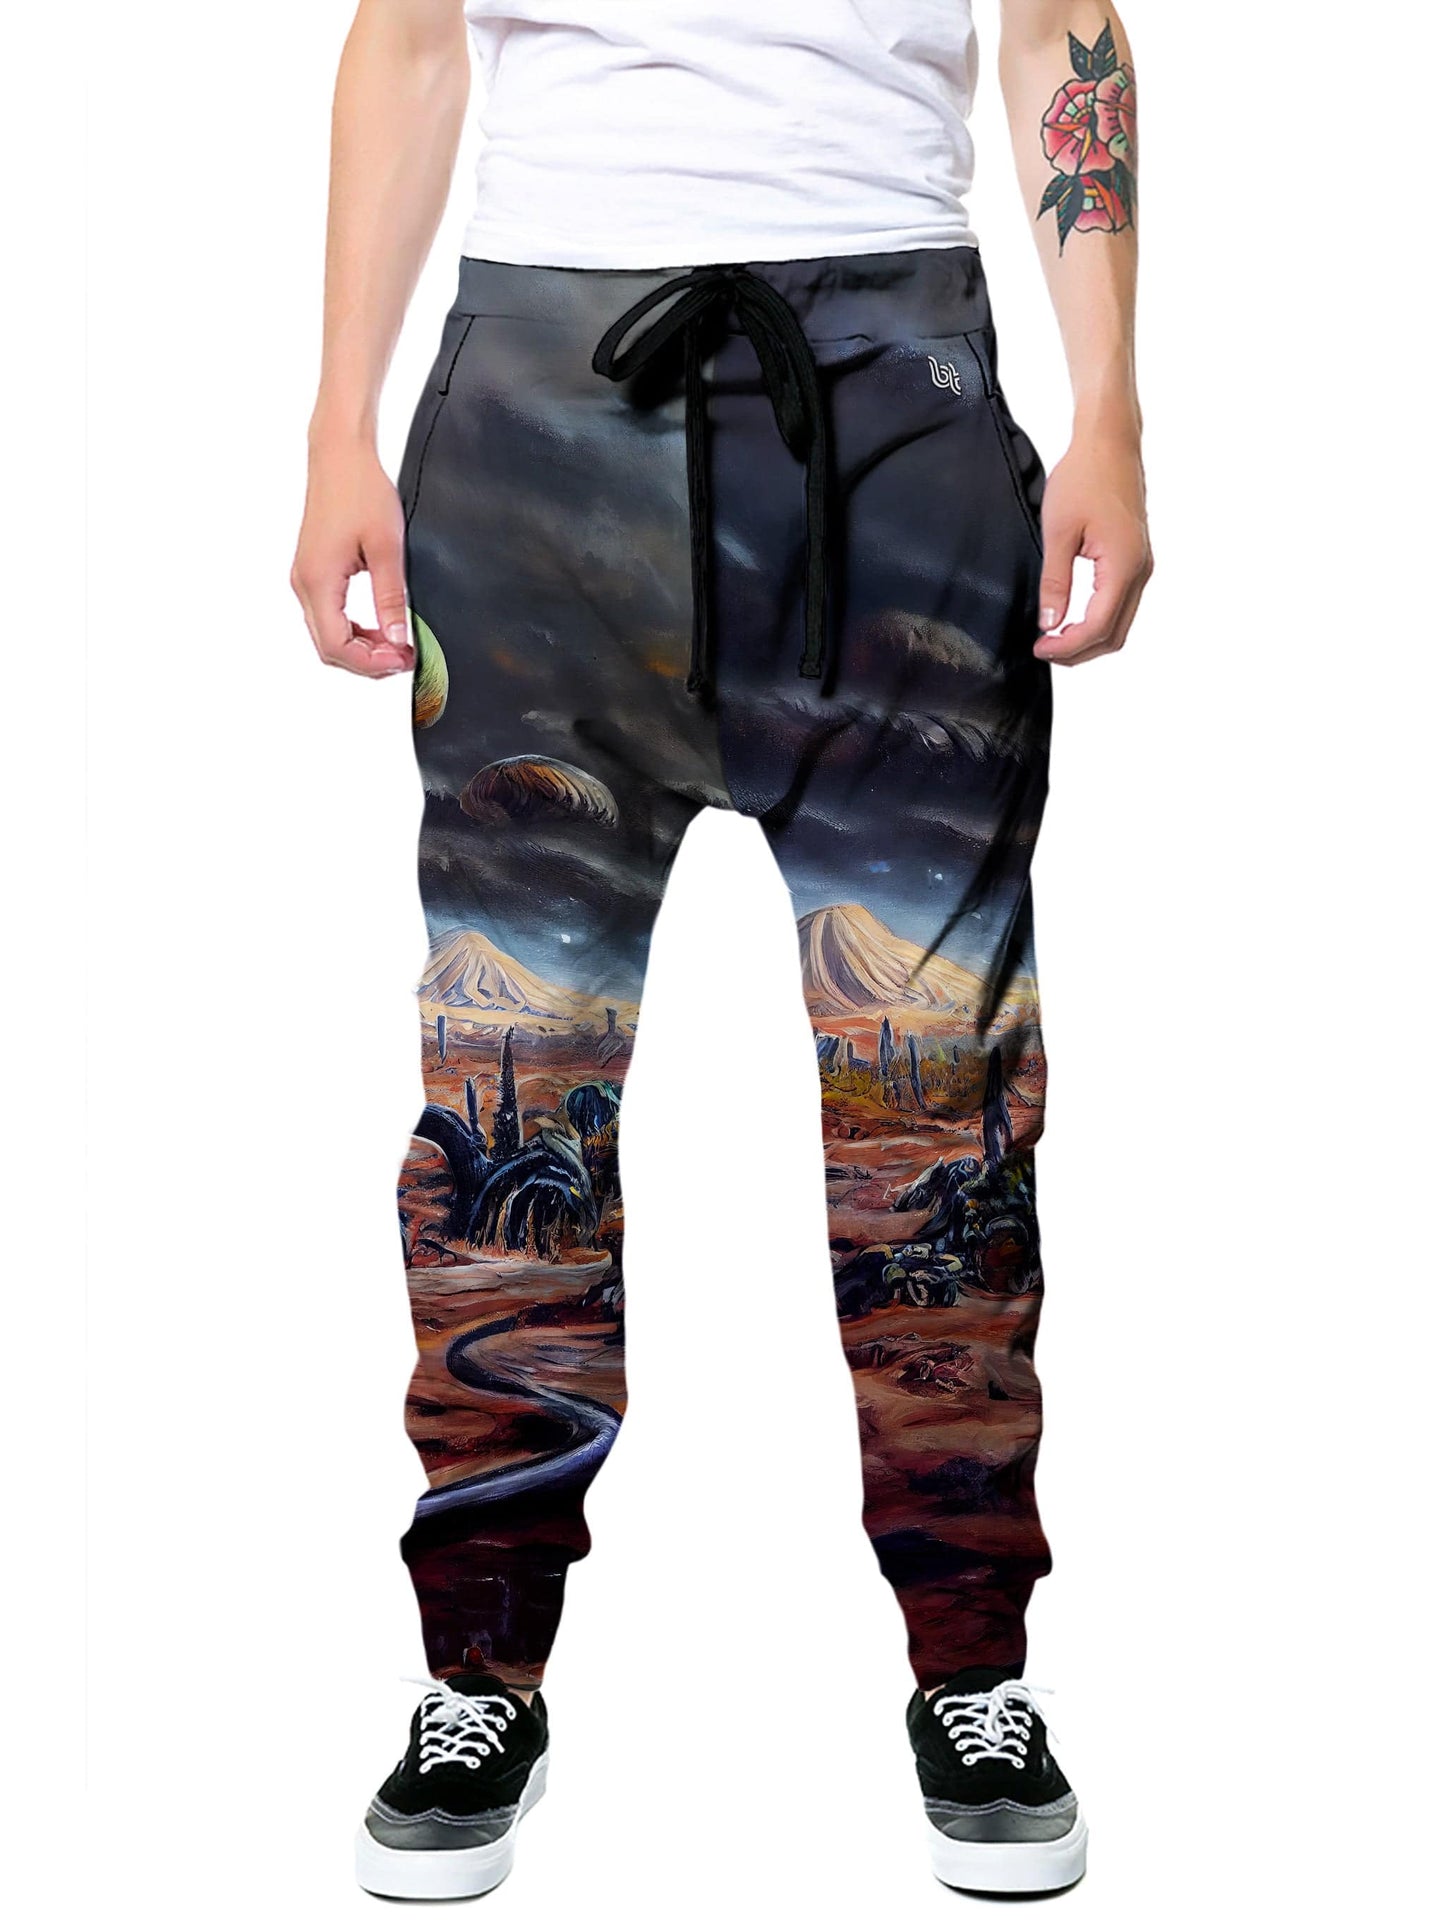 Feast Joggers, Gratefully Dyed, | iEDM